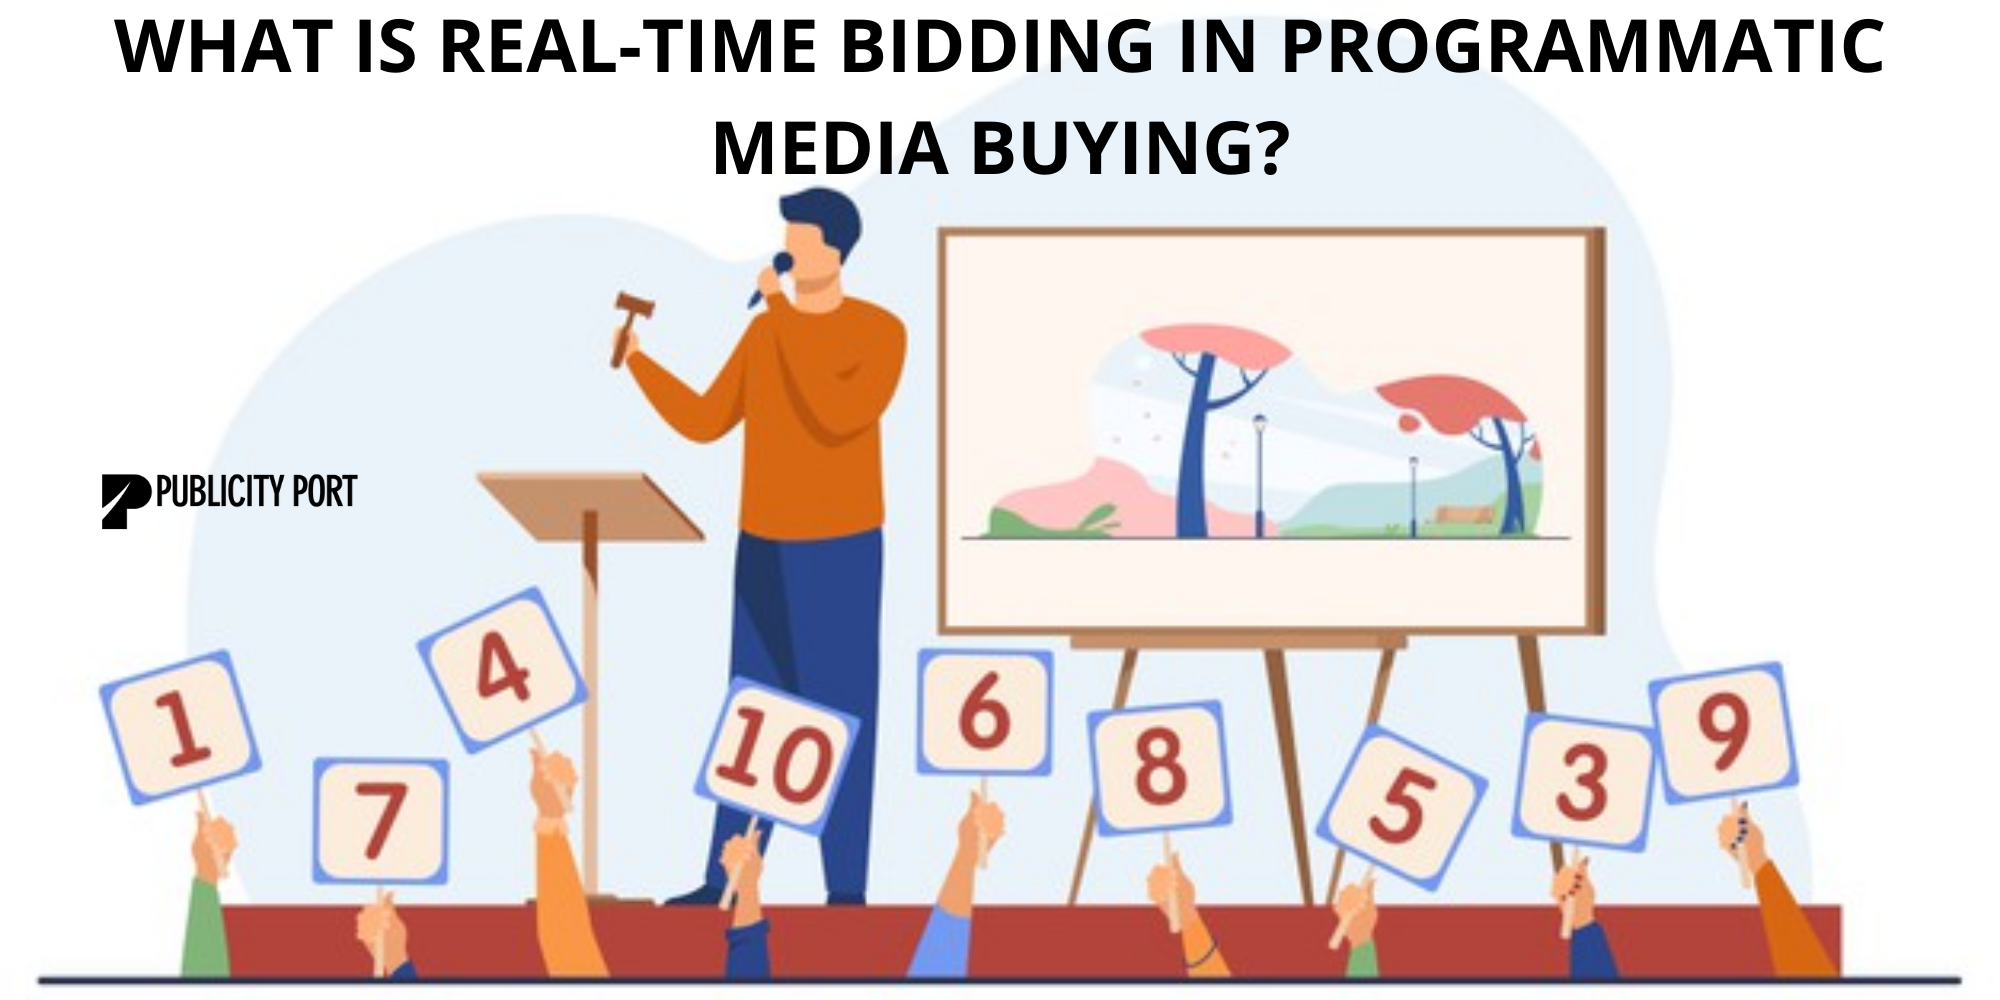 What is Real-time bidding in programmatic media buying